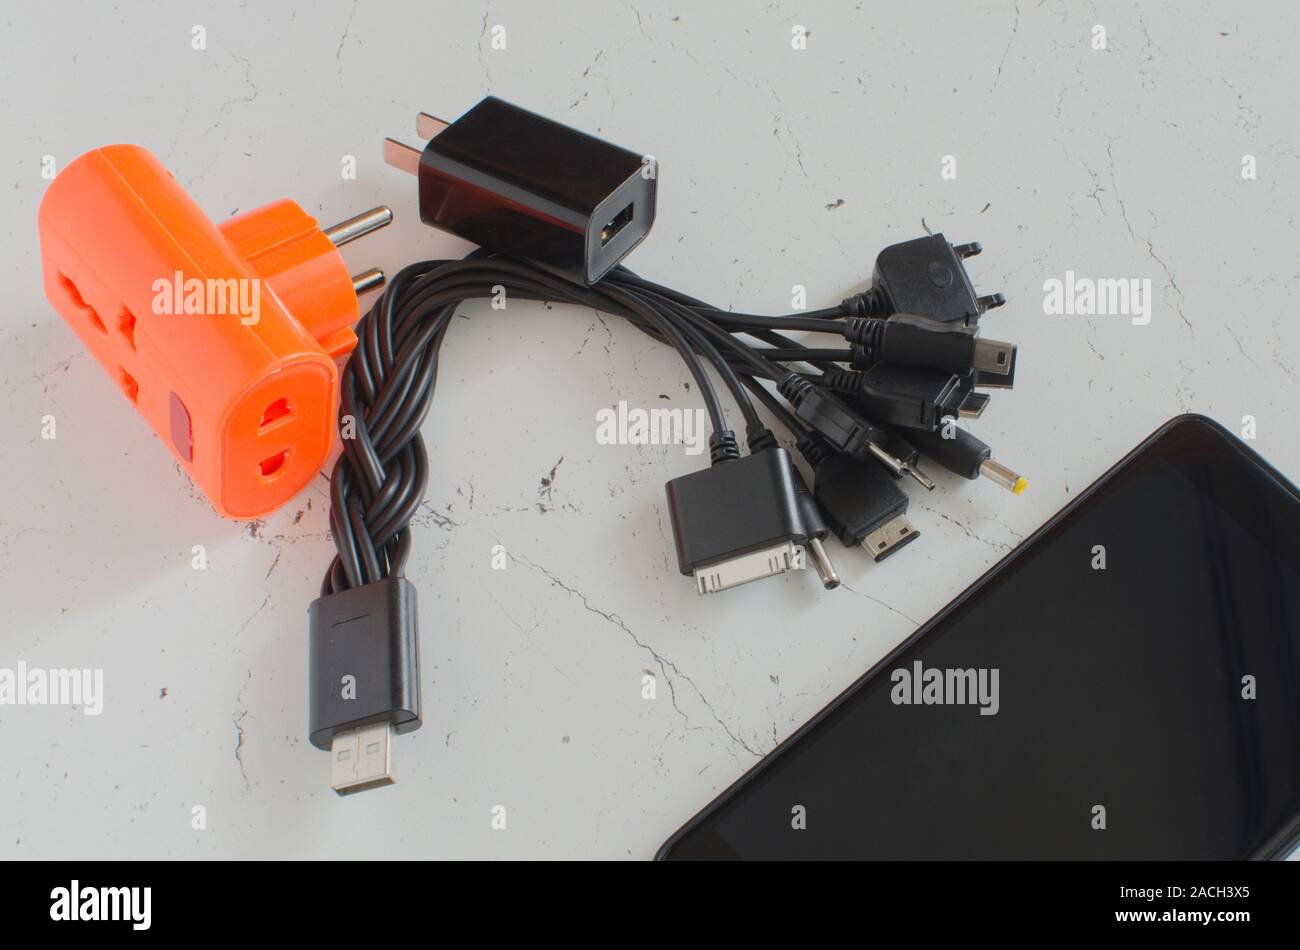 Universal USB plug with power supply for charging smartphones from various manufacturers. Stock Photo